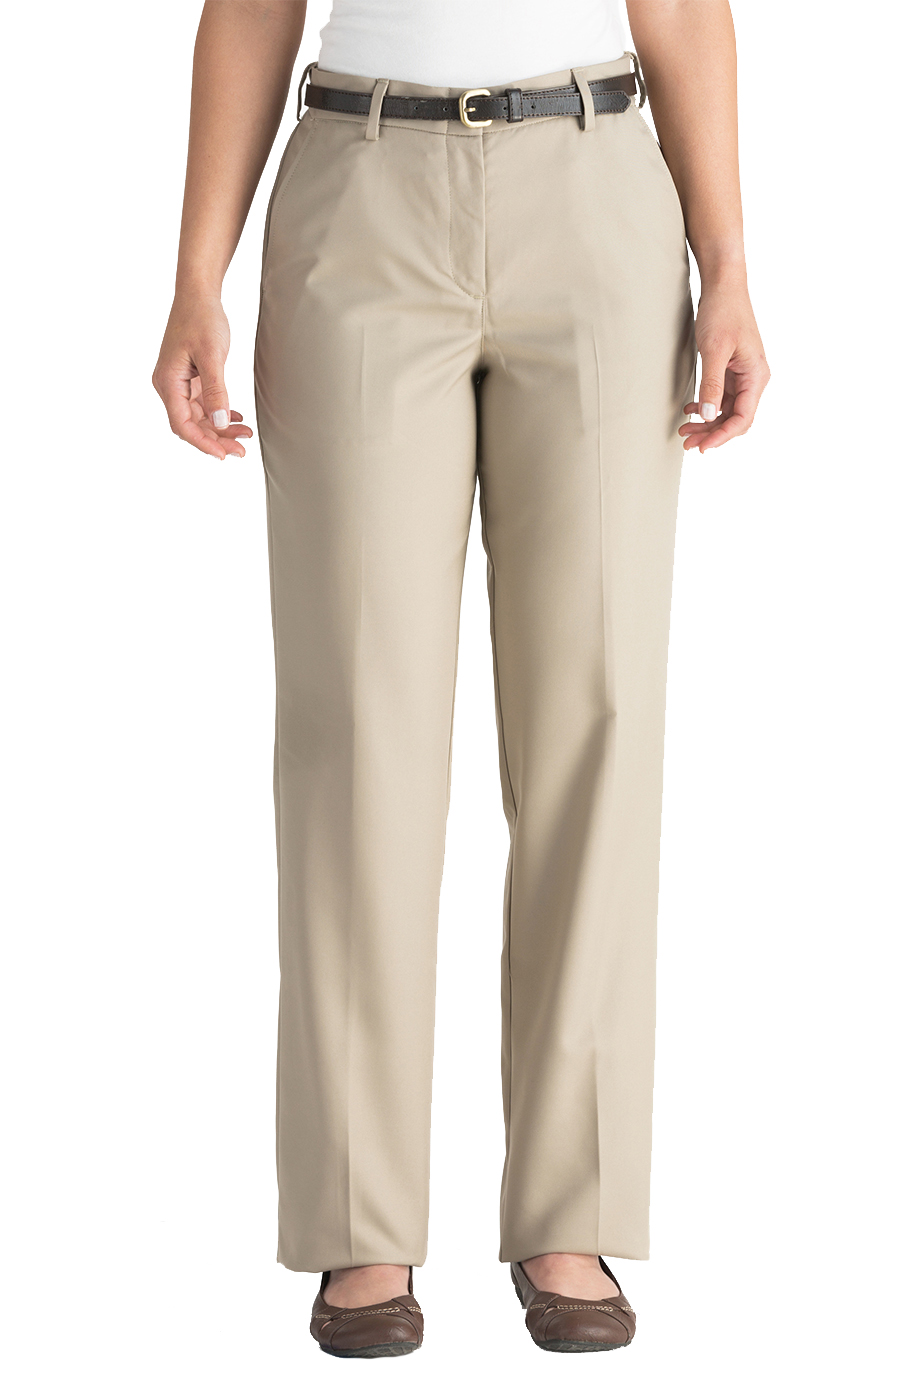 Edwards Womens Business Casual Flat Front Pant 